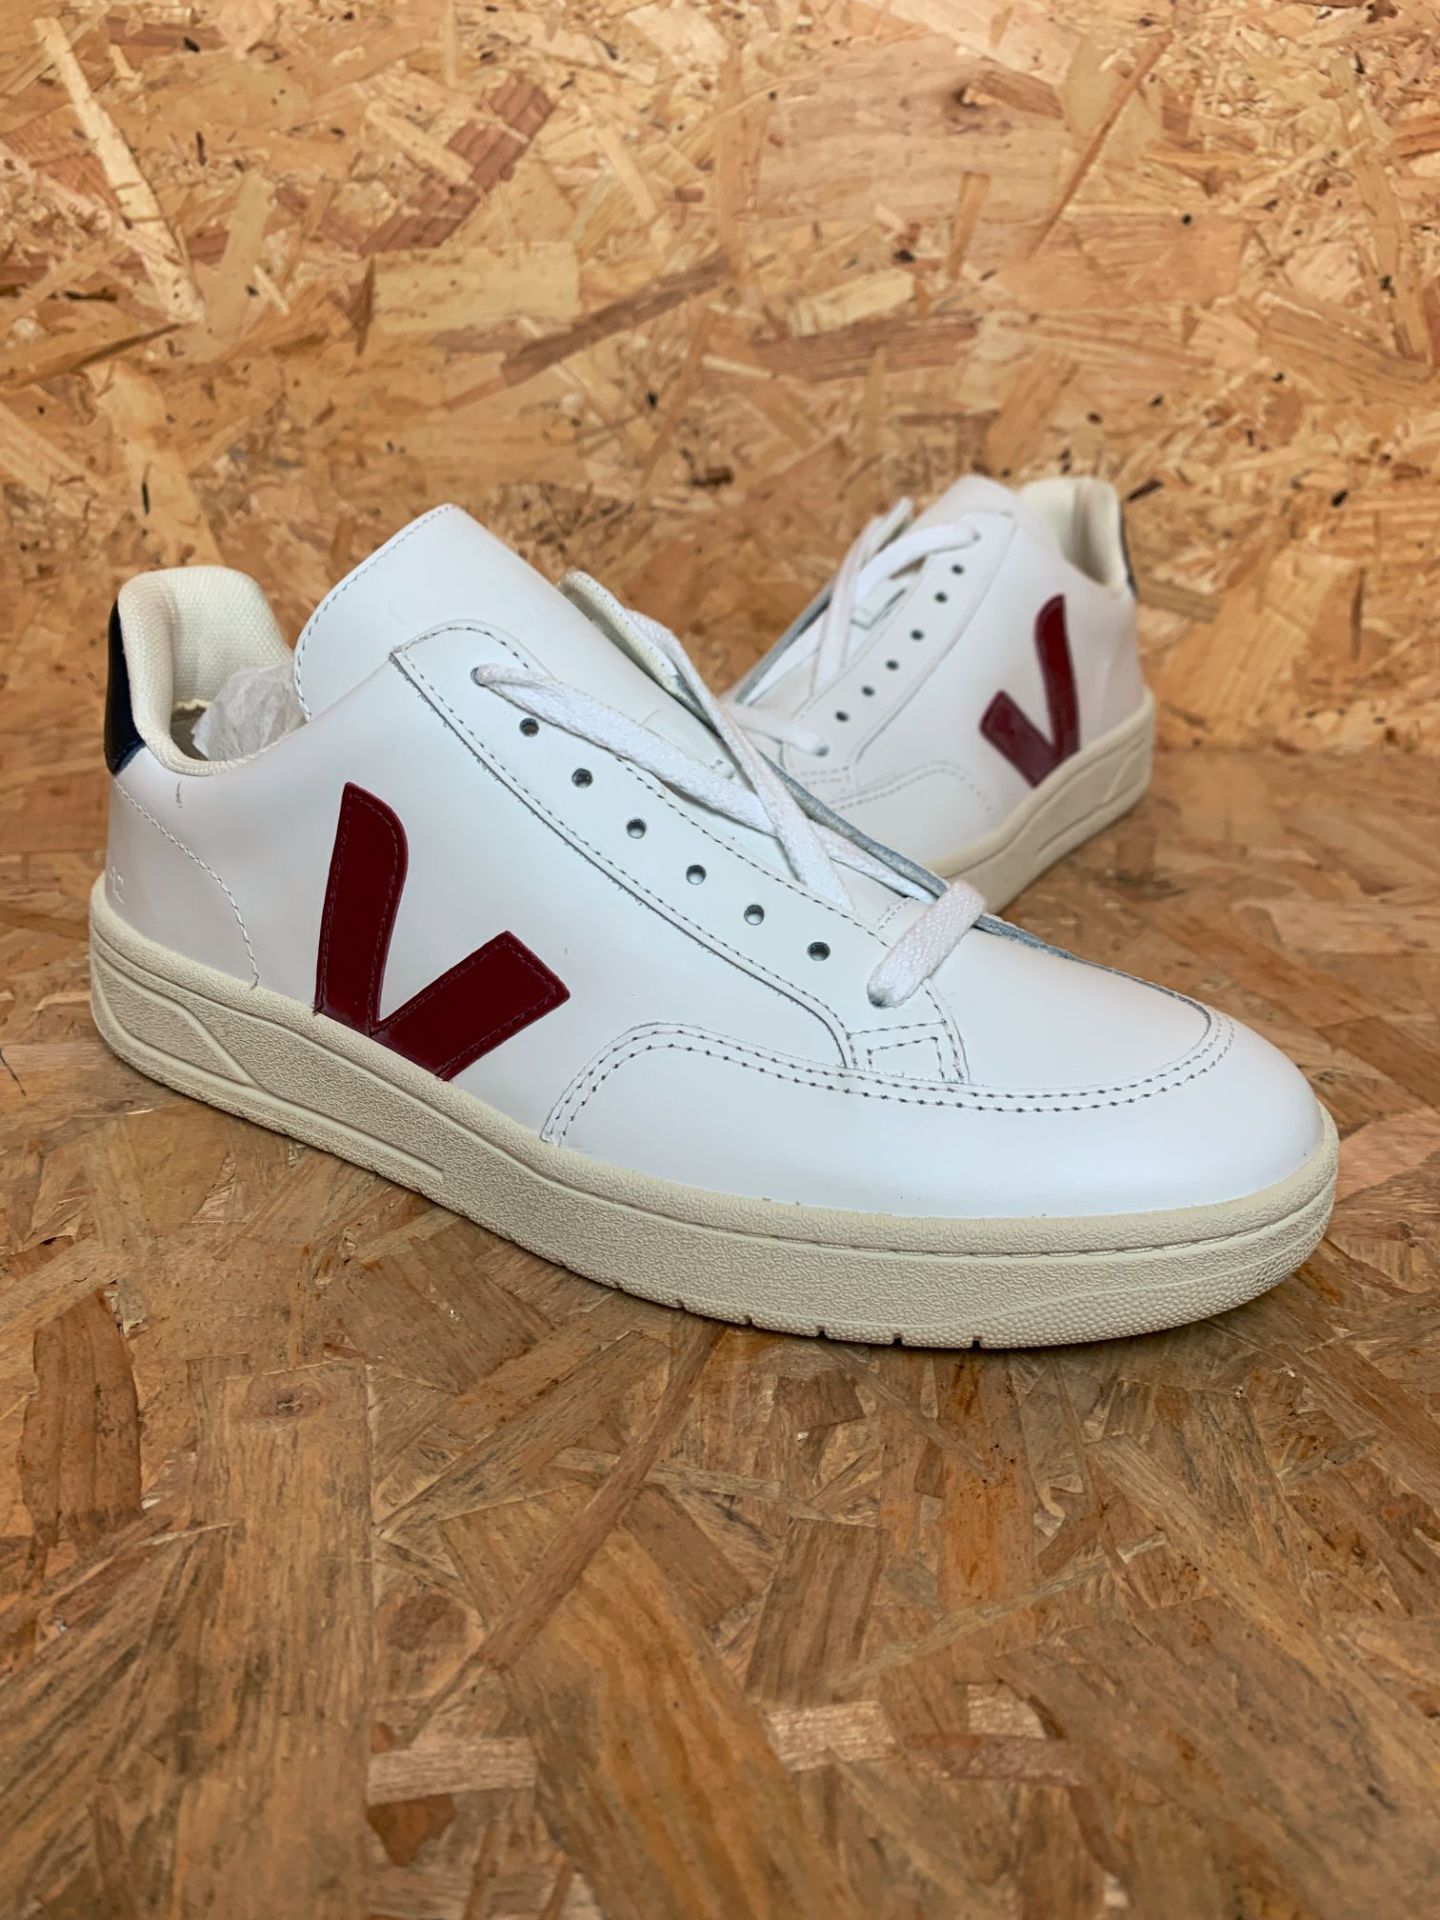 1 x PAIR OF VEJA V12 LEATHER TRAINERS / SIZE 7 / RRP £115.00 / CUSTOMER RETURN - GRADE A